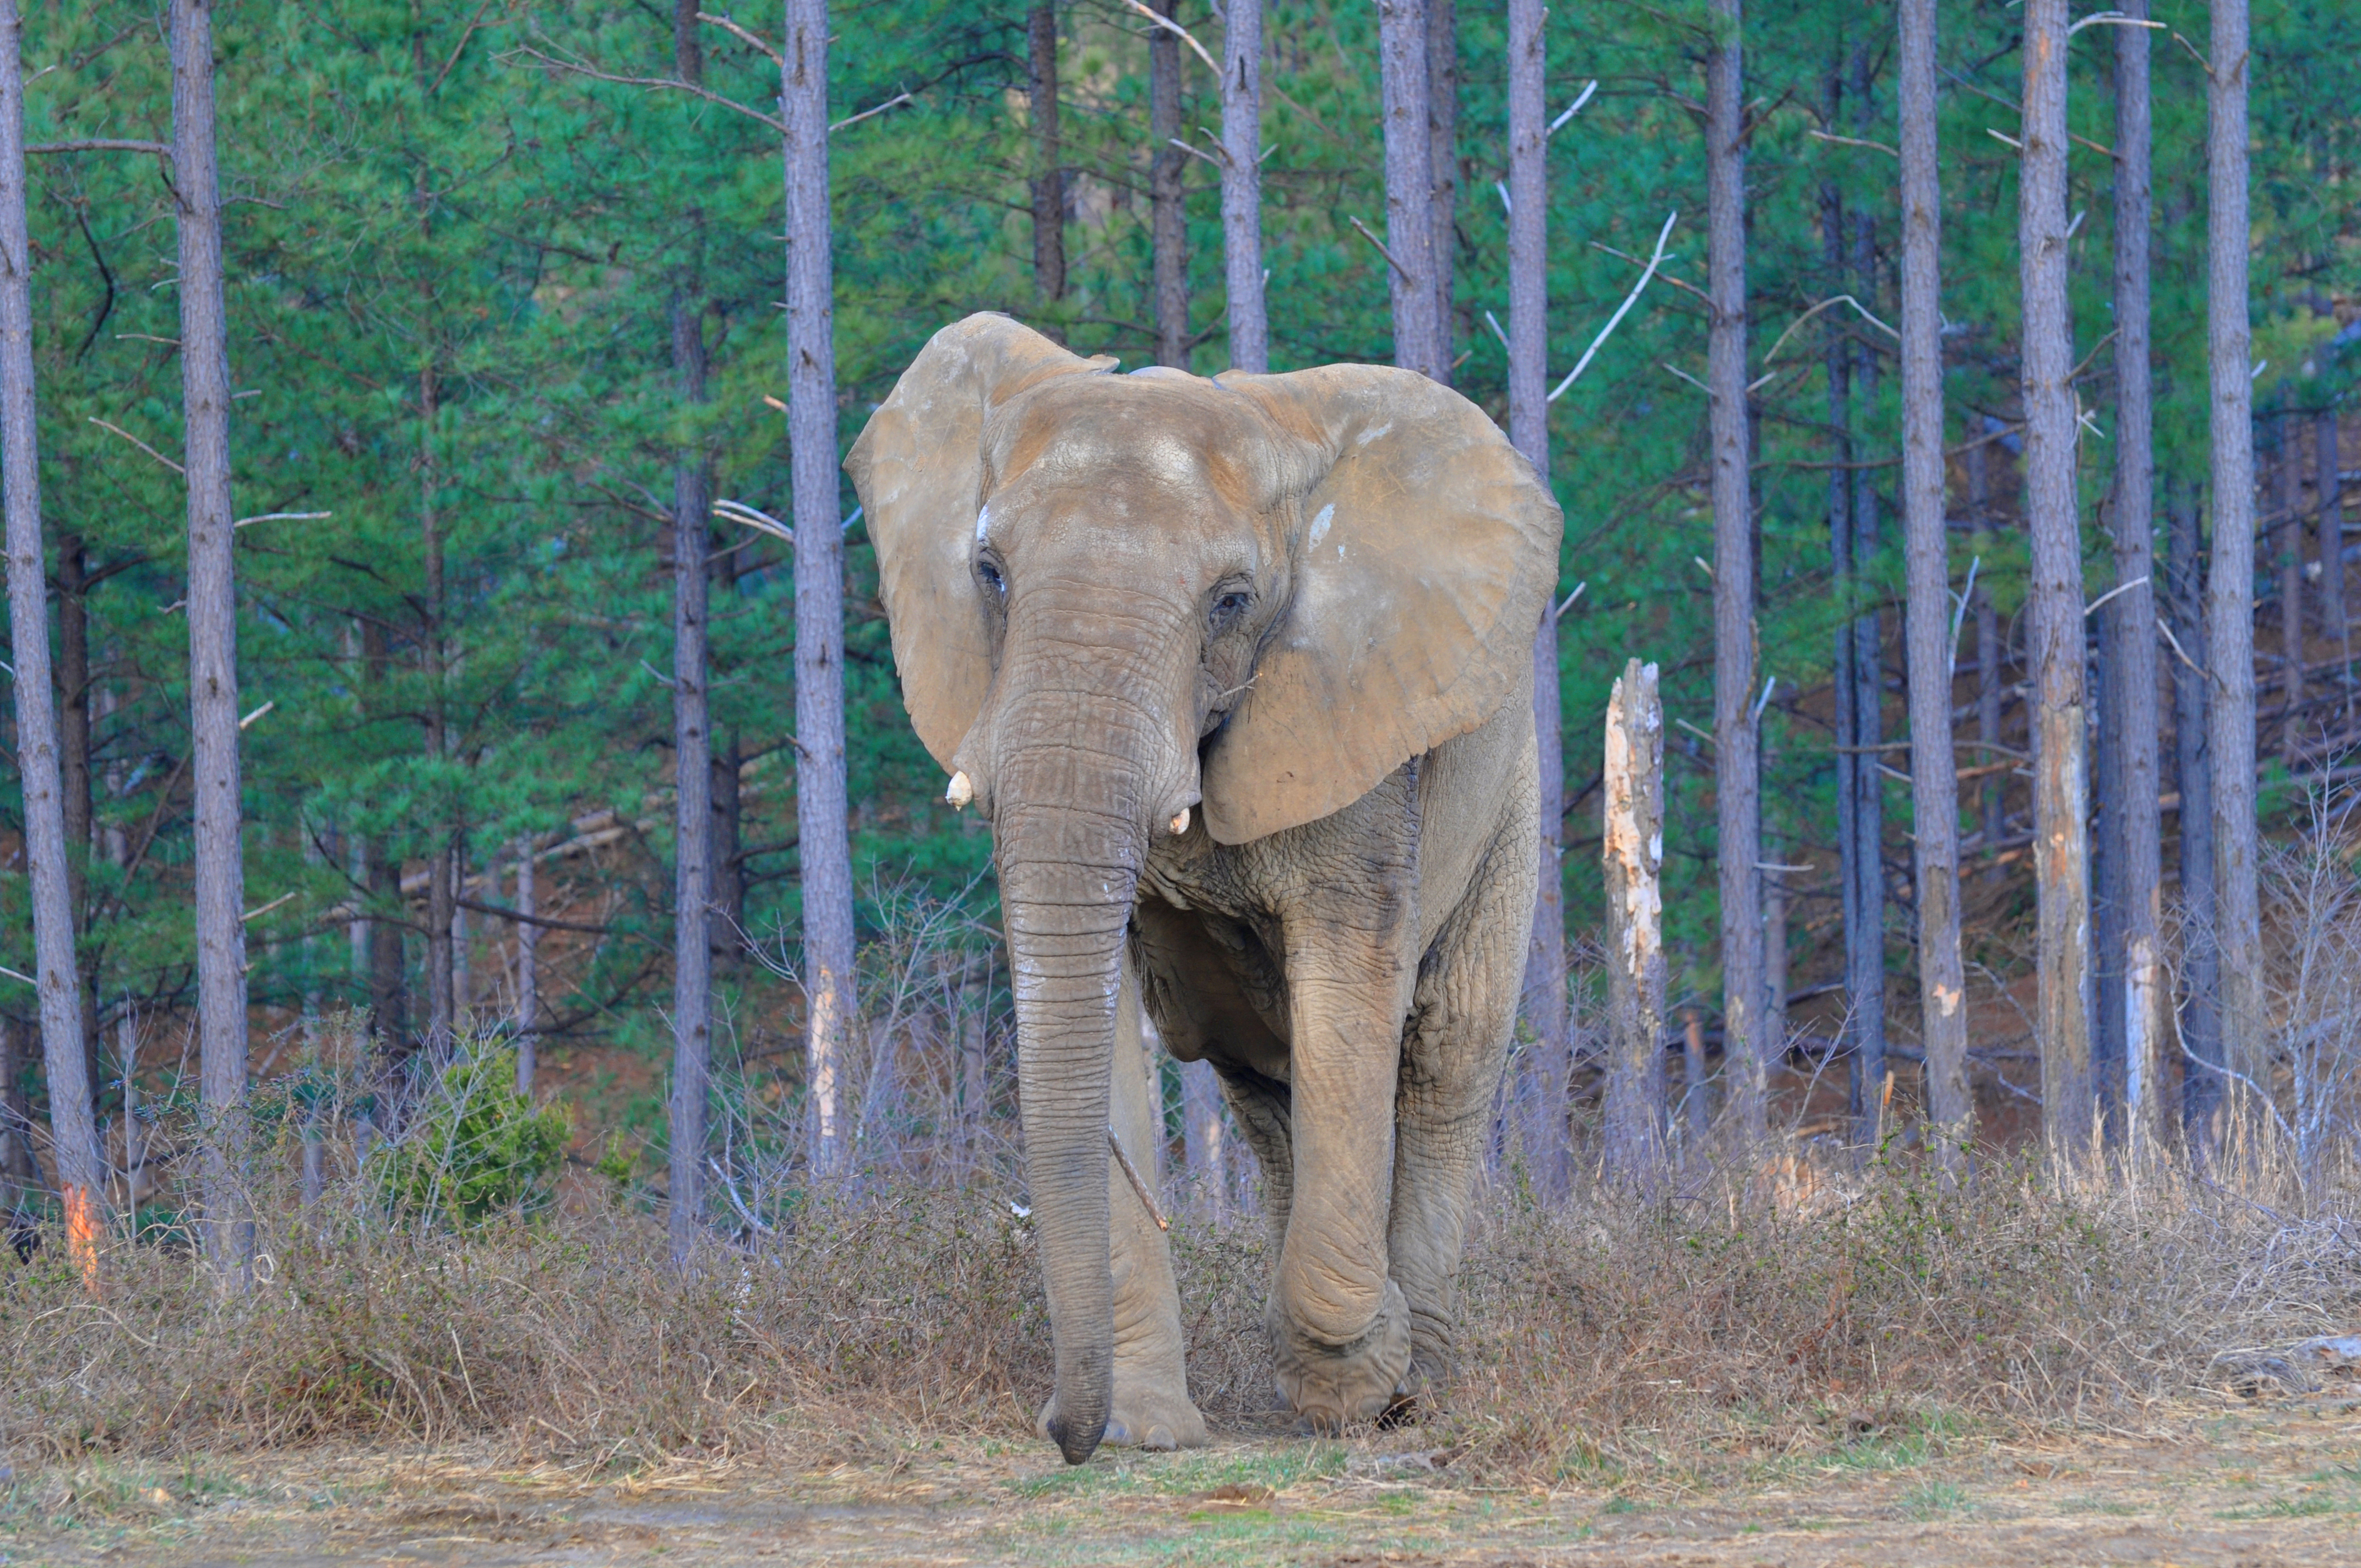 Elephant Facts - The Elephant Sanctuary in Tennessee